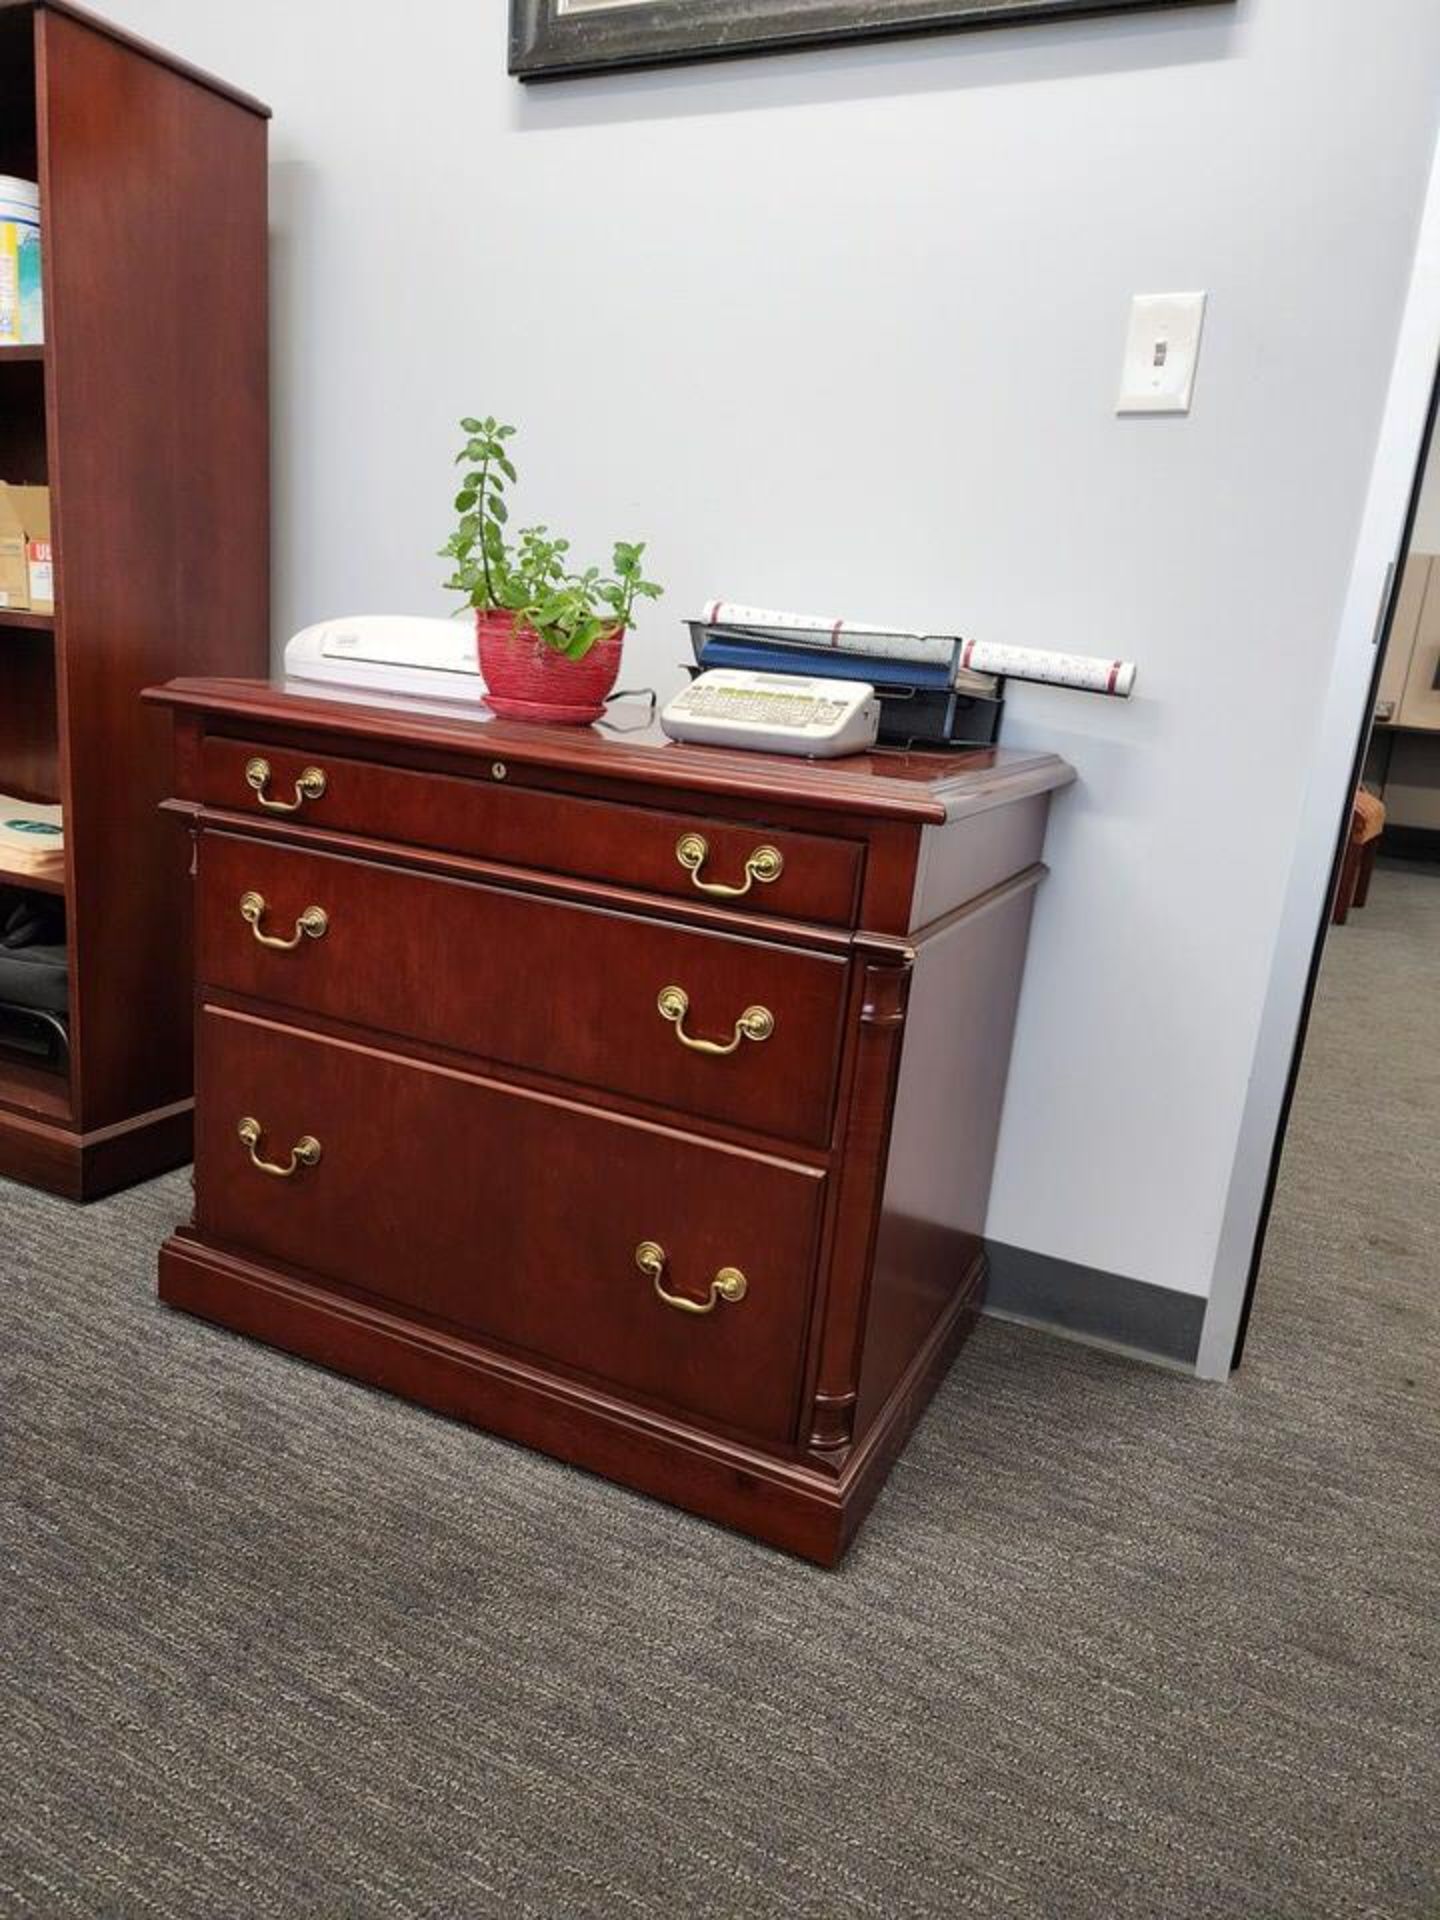 Office Furniture To Include But Not Limited To: Desk, Monitors, Keyboard & Mouse, etc. - Image 3 of 11